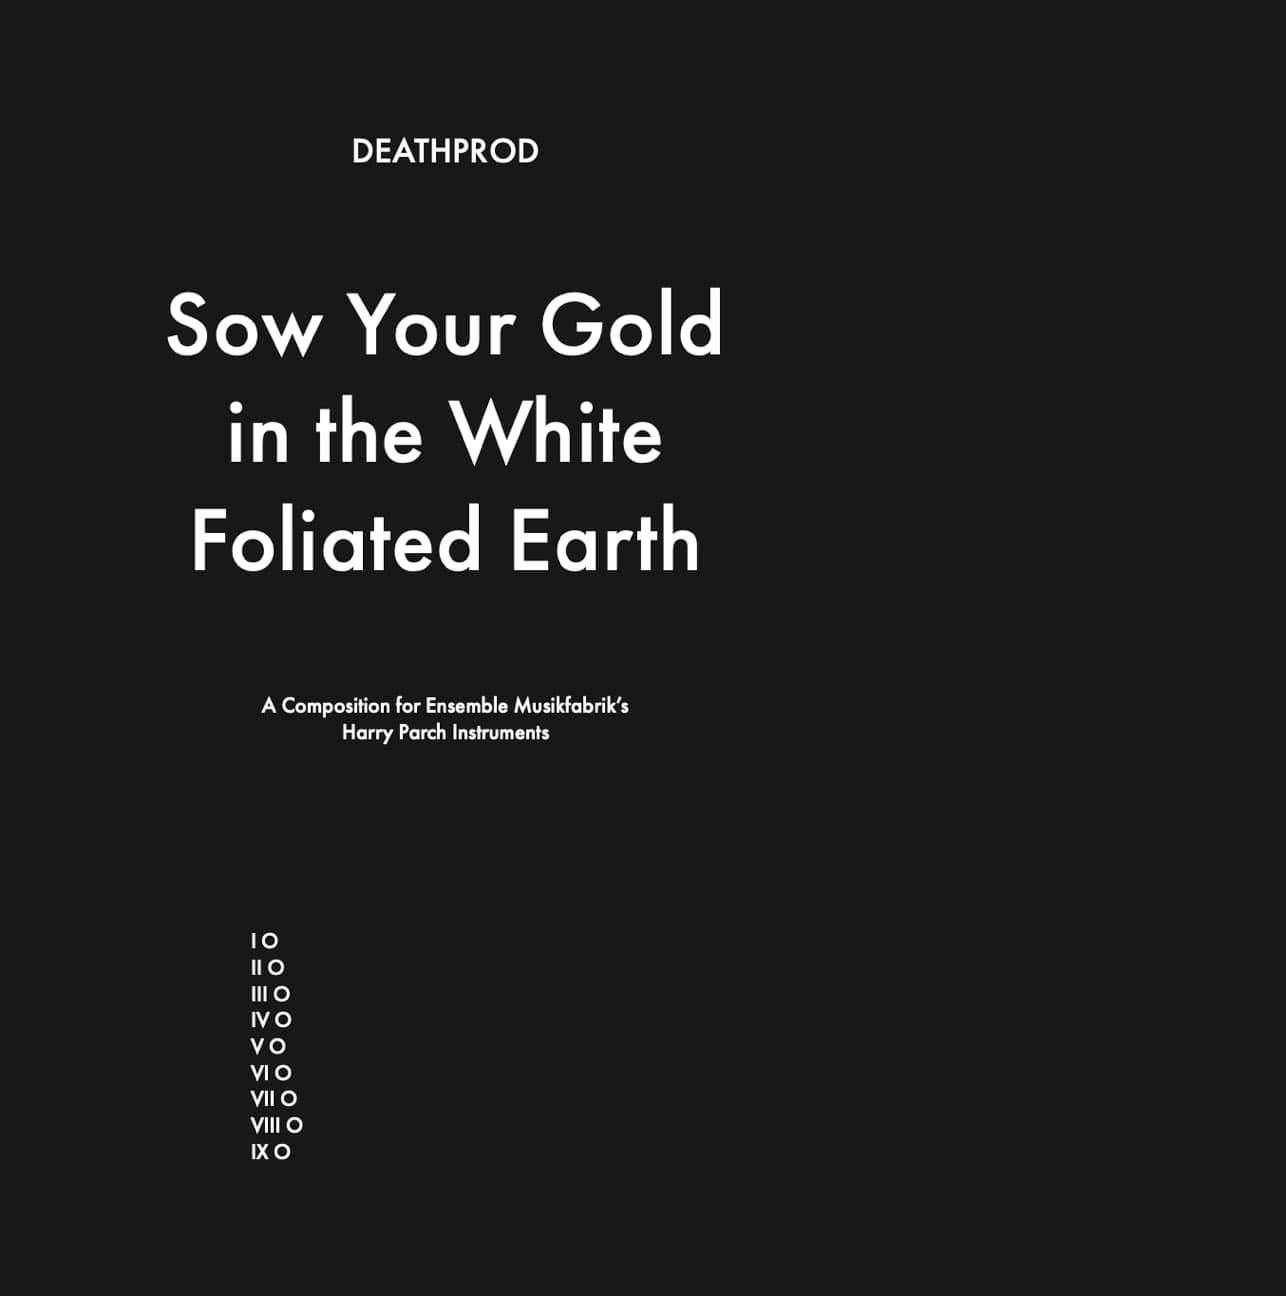 ⭐️ Deathprod -“Sow Your Gold in the White Foliated Earth”  ⭐️